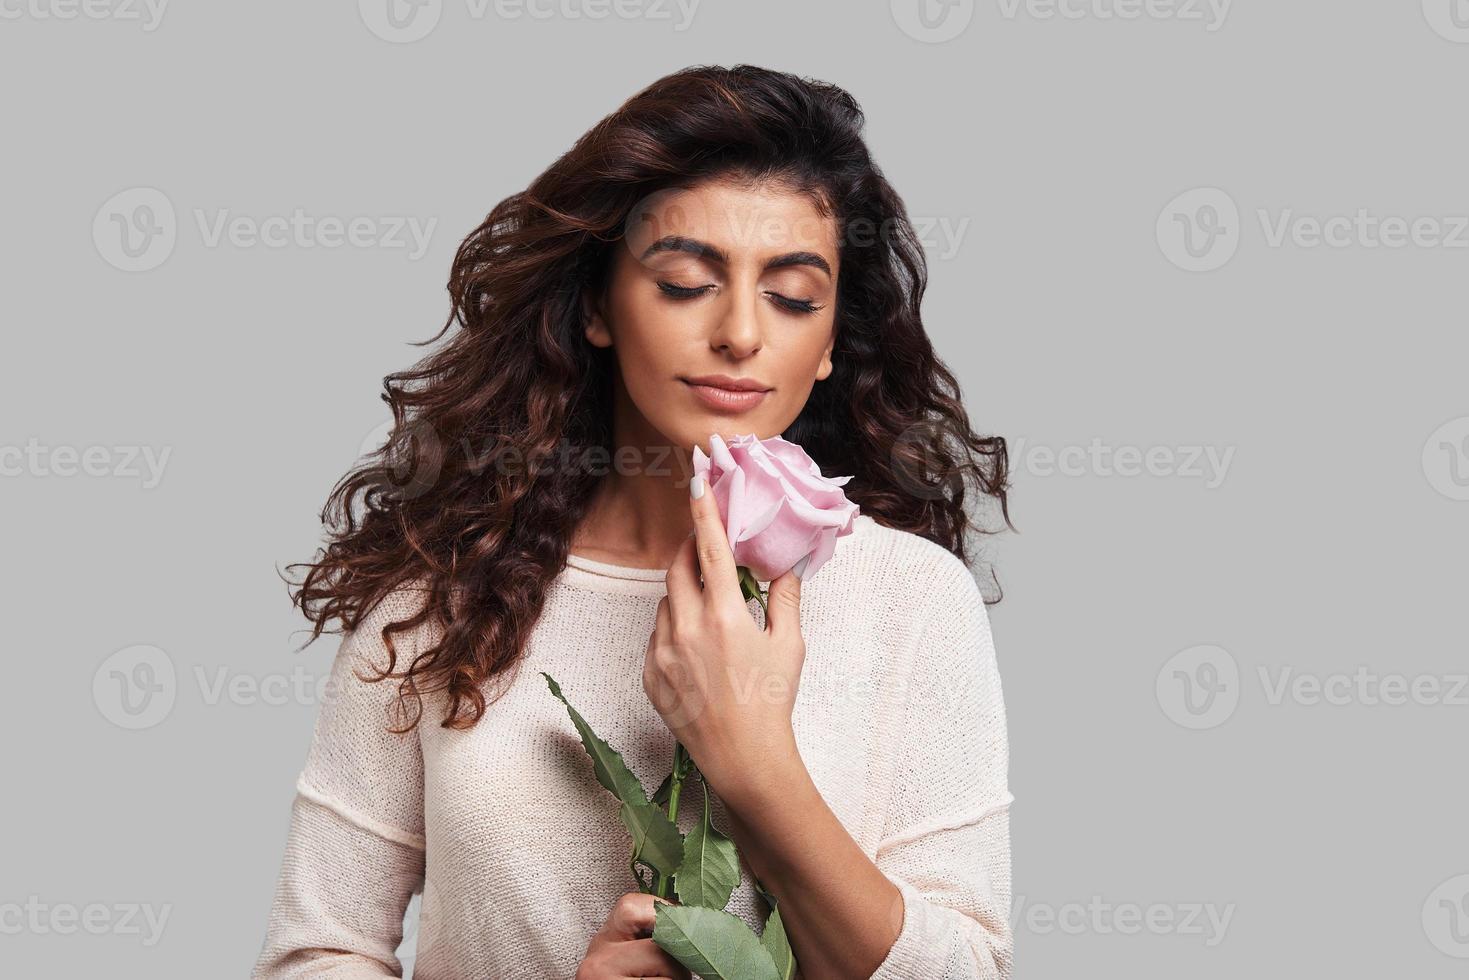 Lost in dreams. Attractive young smiling woman keeping eyes closed and holding a flower while standing against grey background photo